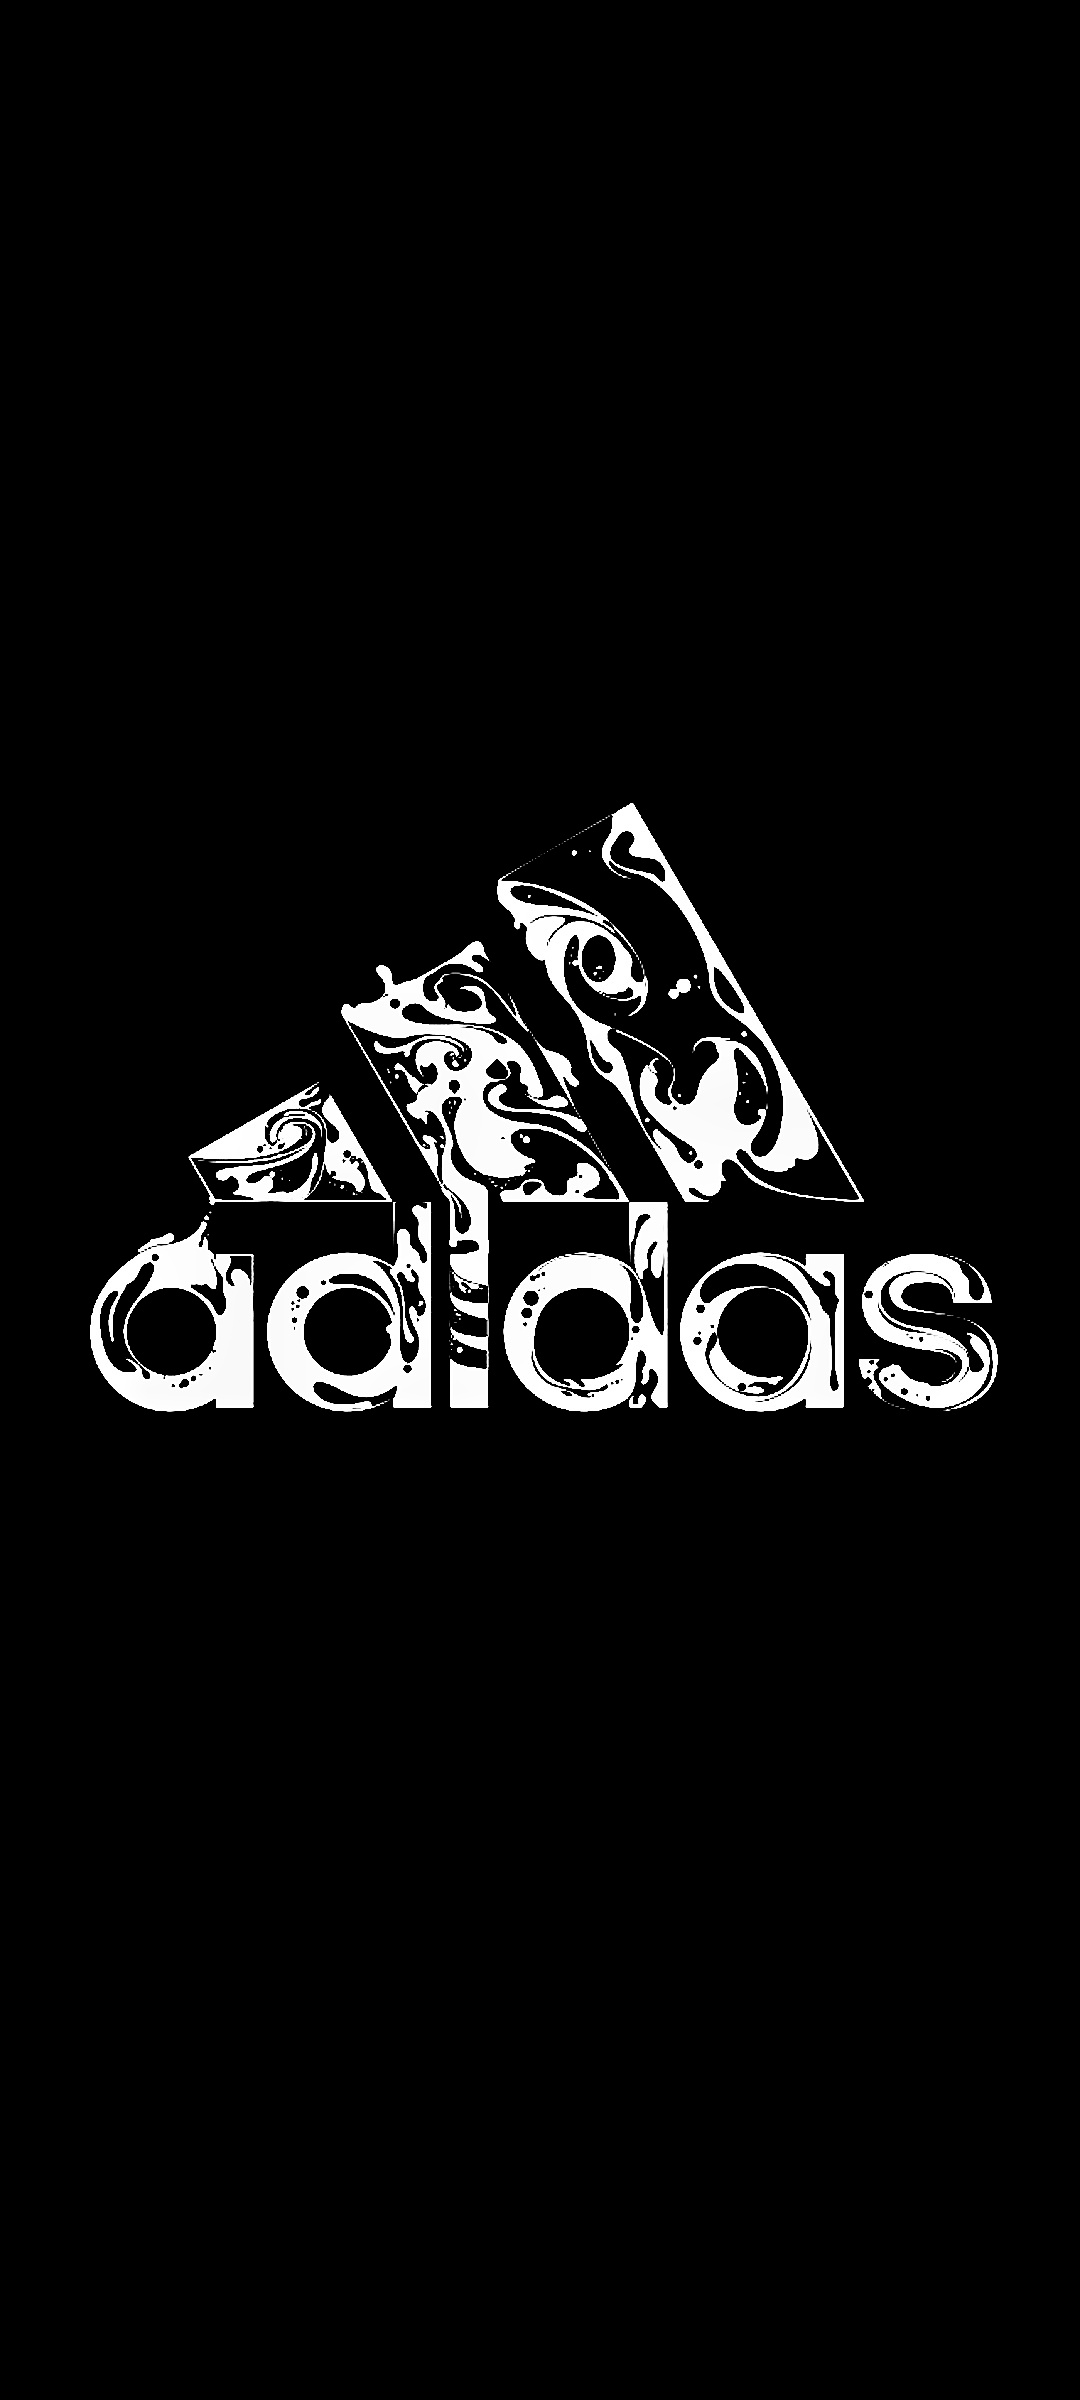 Adidas logo, Abstract backgrounds, Screen resolution, Artistic visuals, 1080x2400 HD Handy